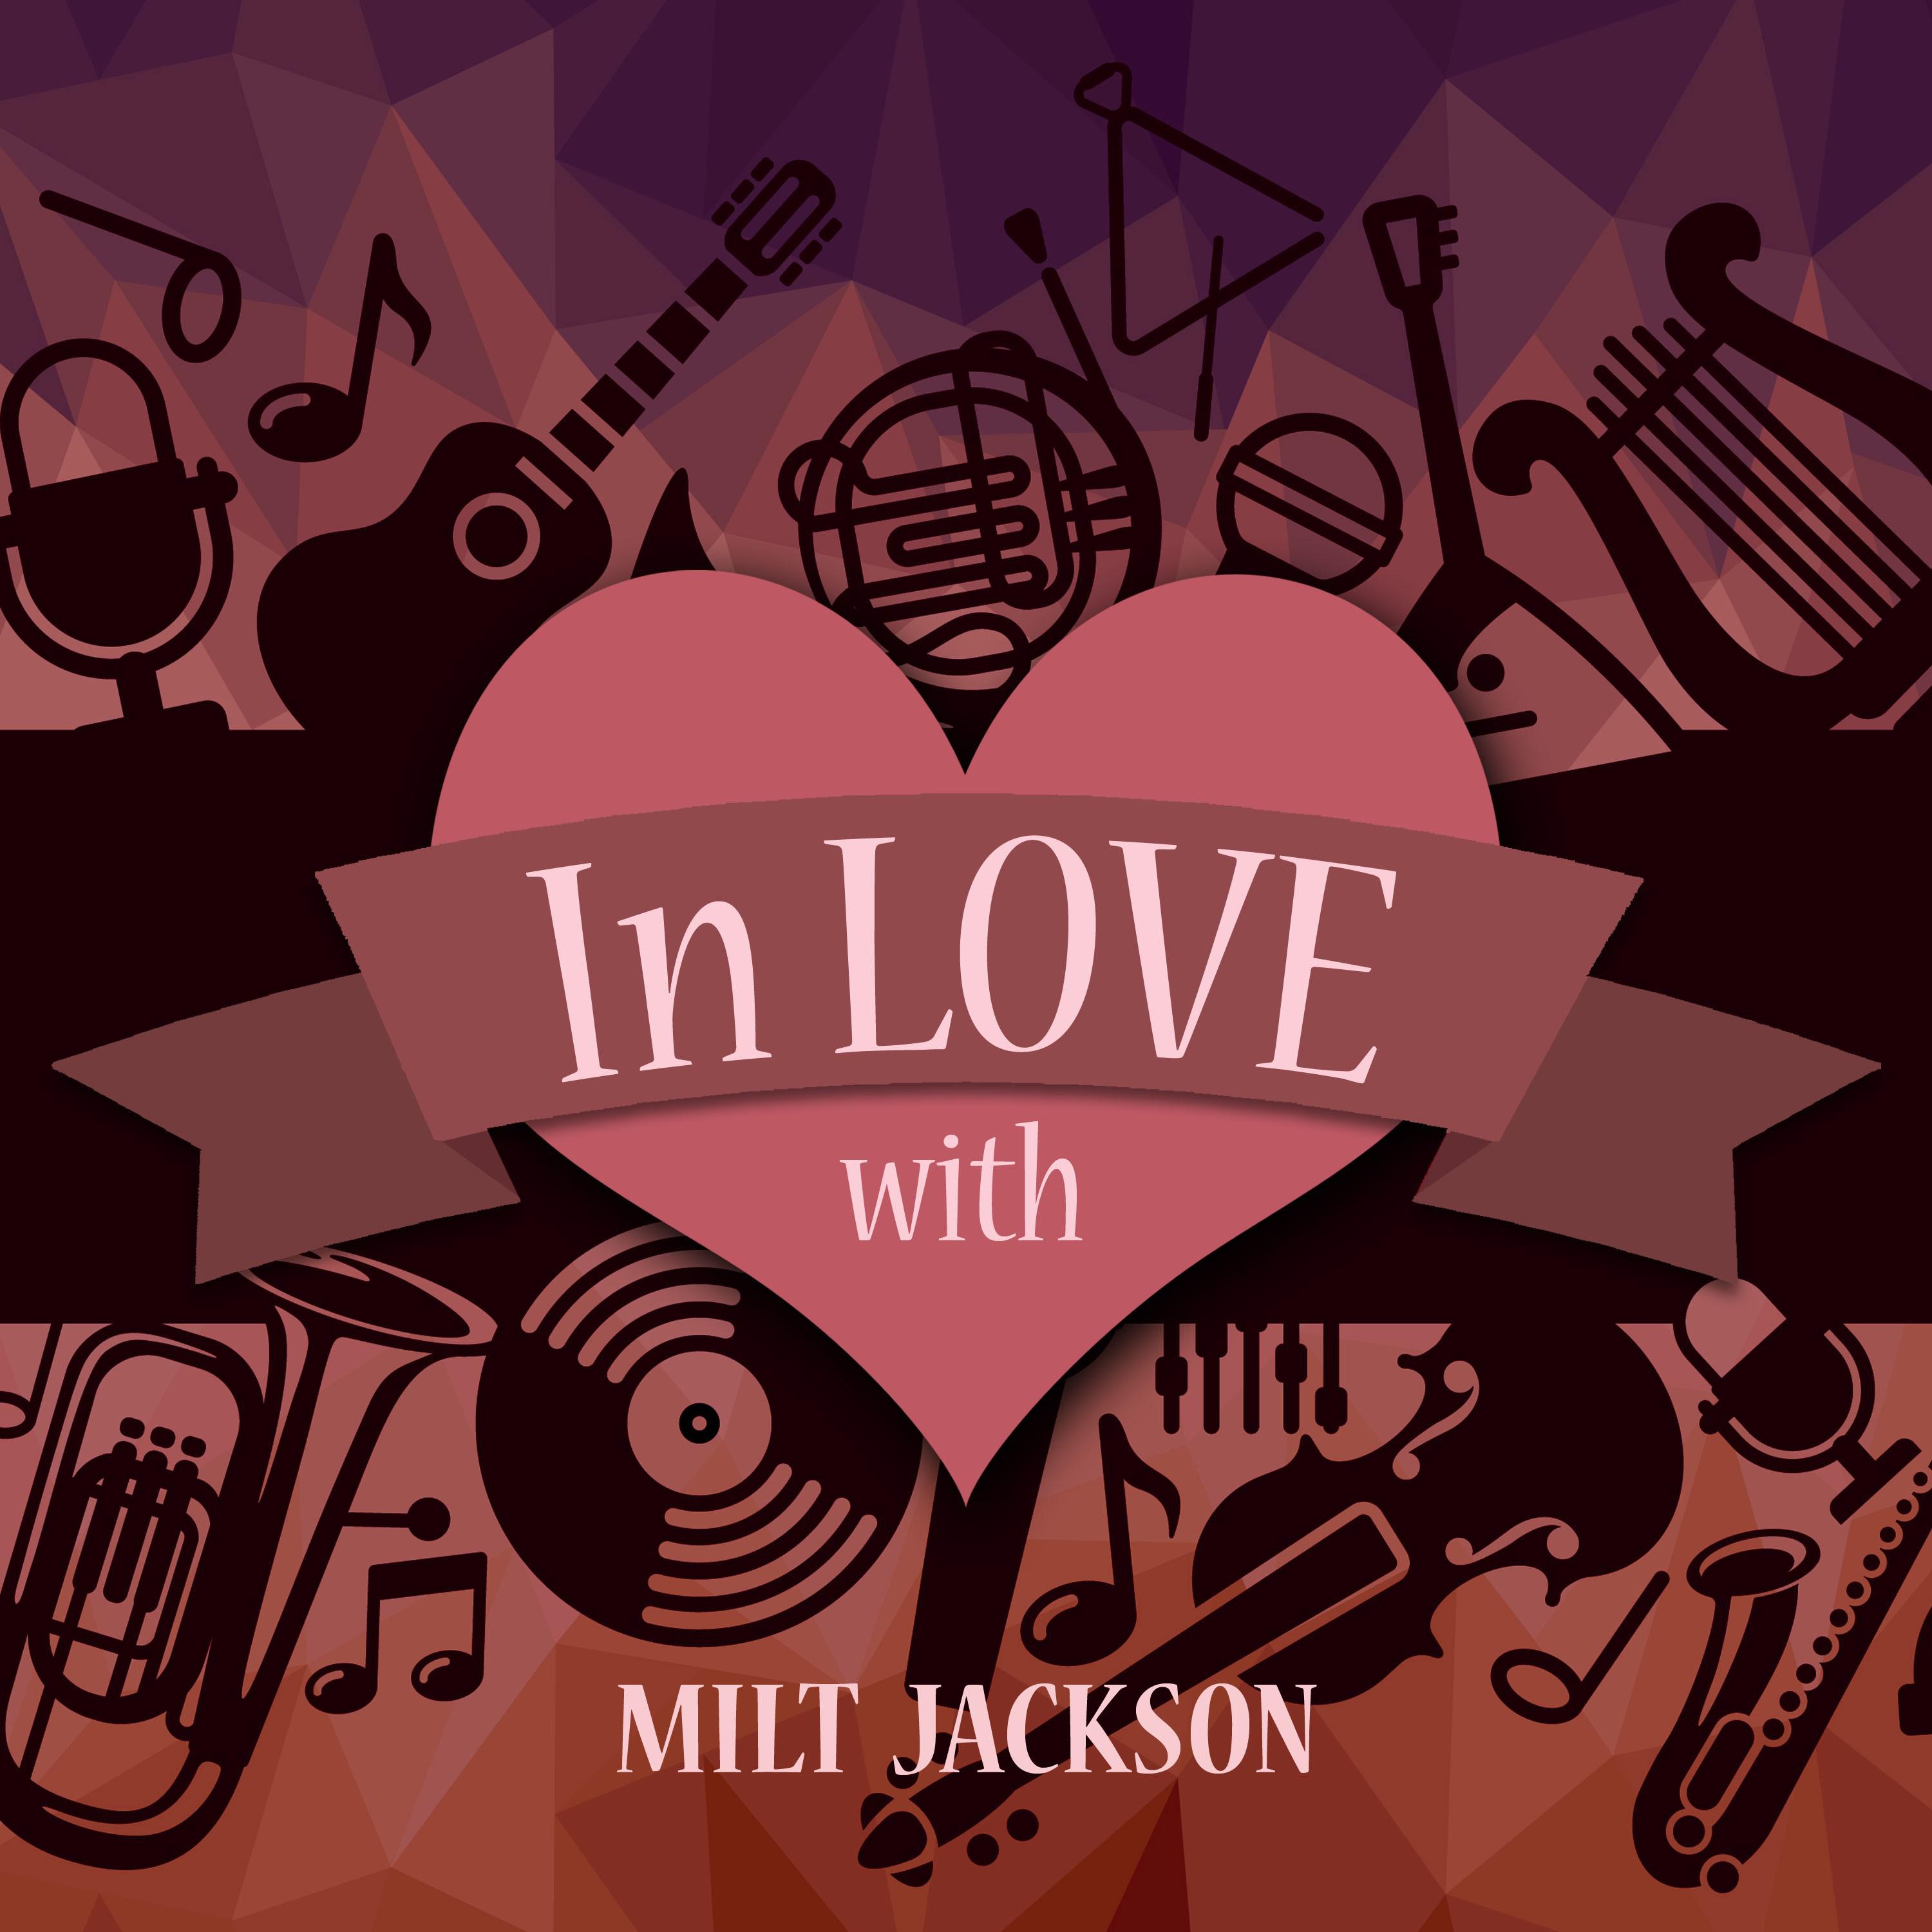 In Love with Milt Jackson